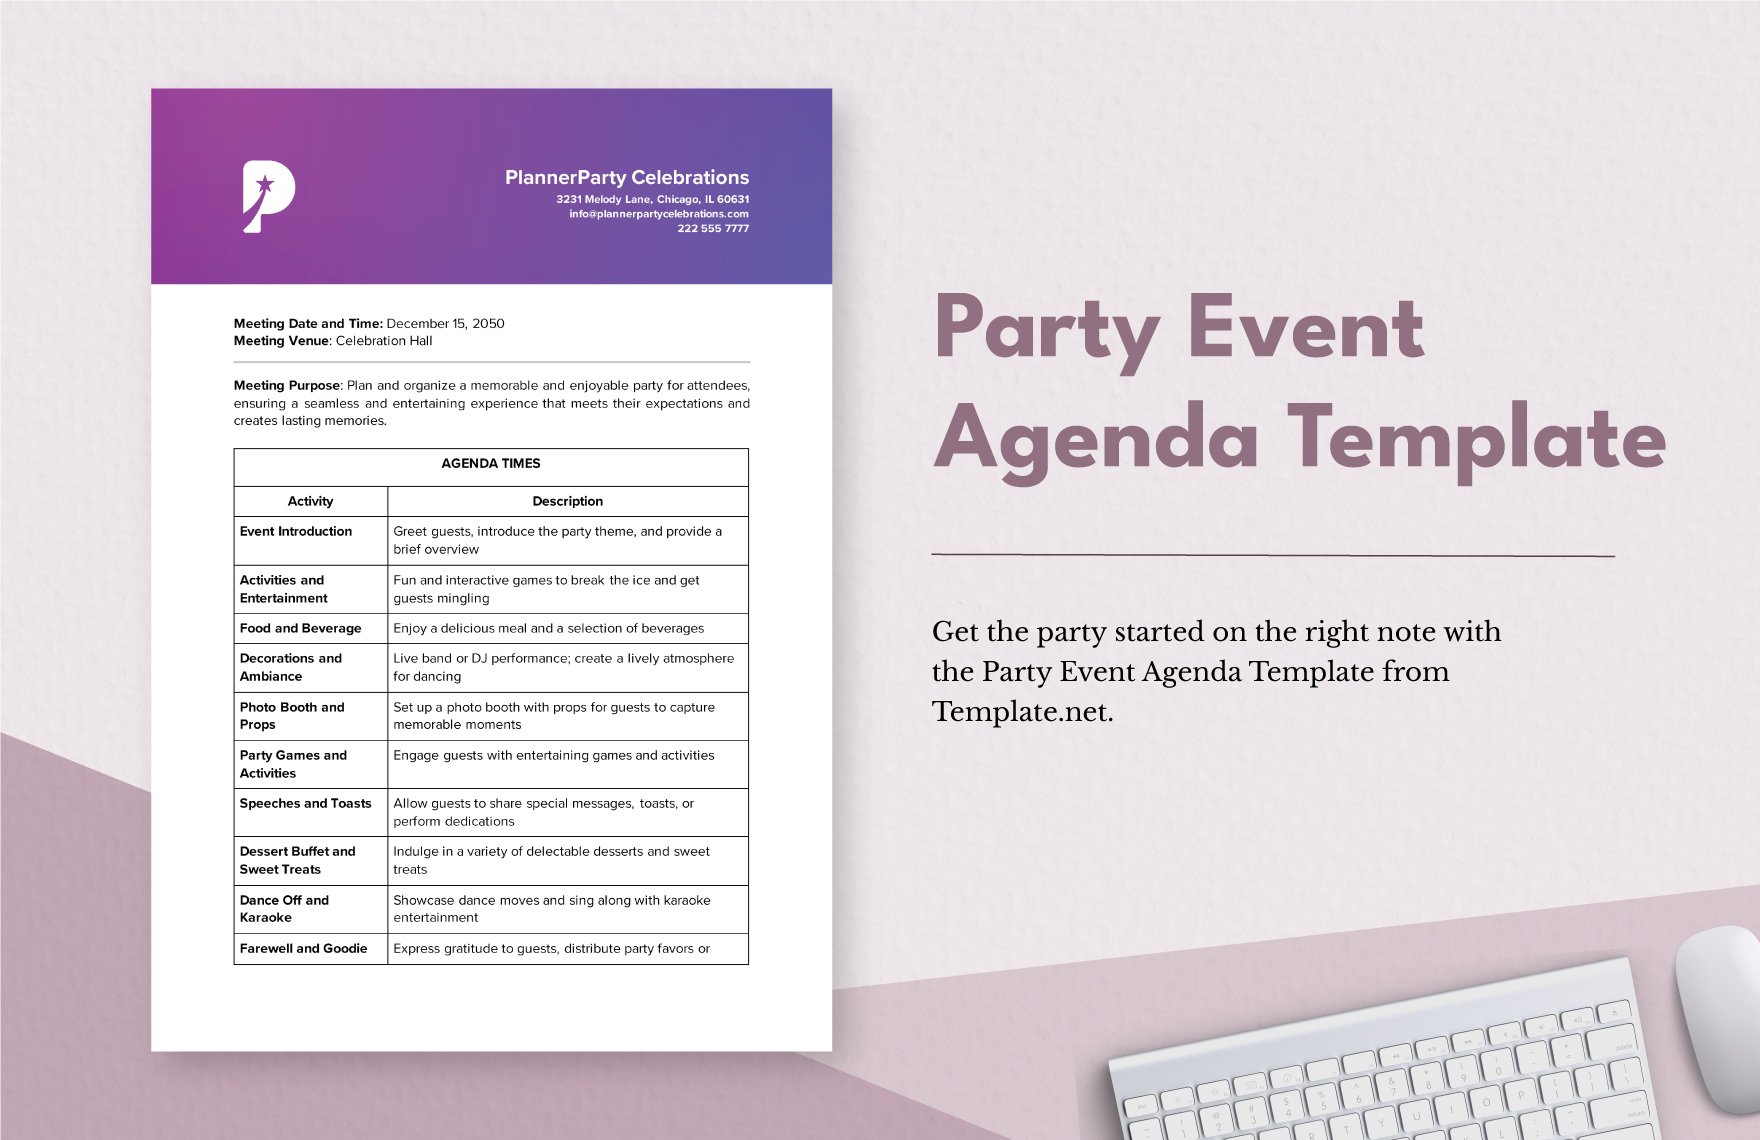 Party Event Agenda Template in Word, Google Docs, PDF